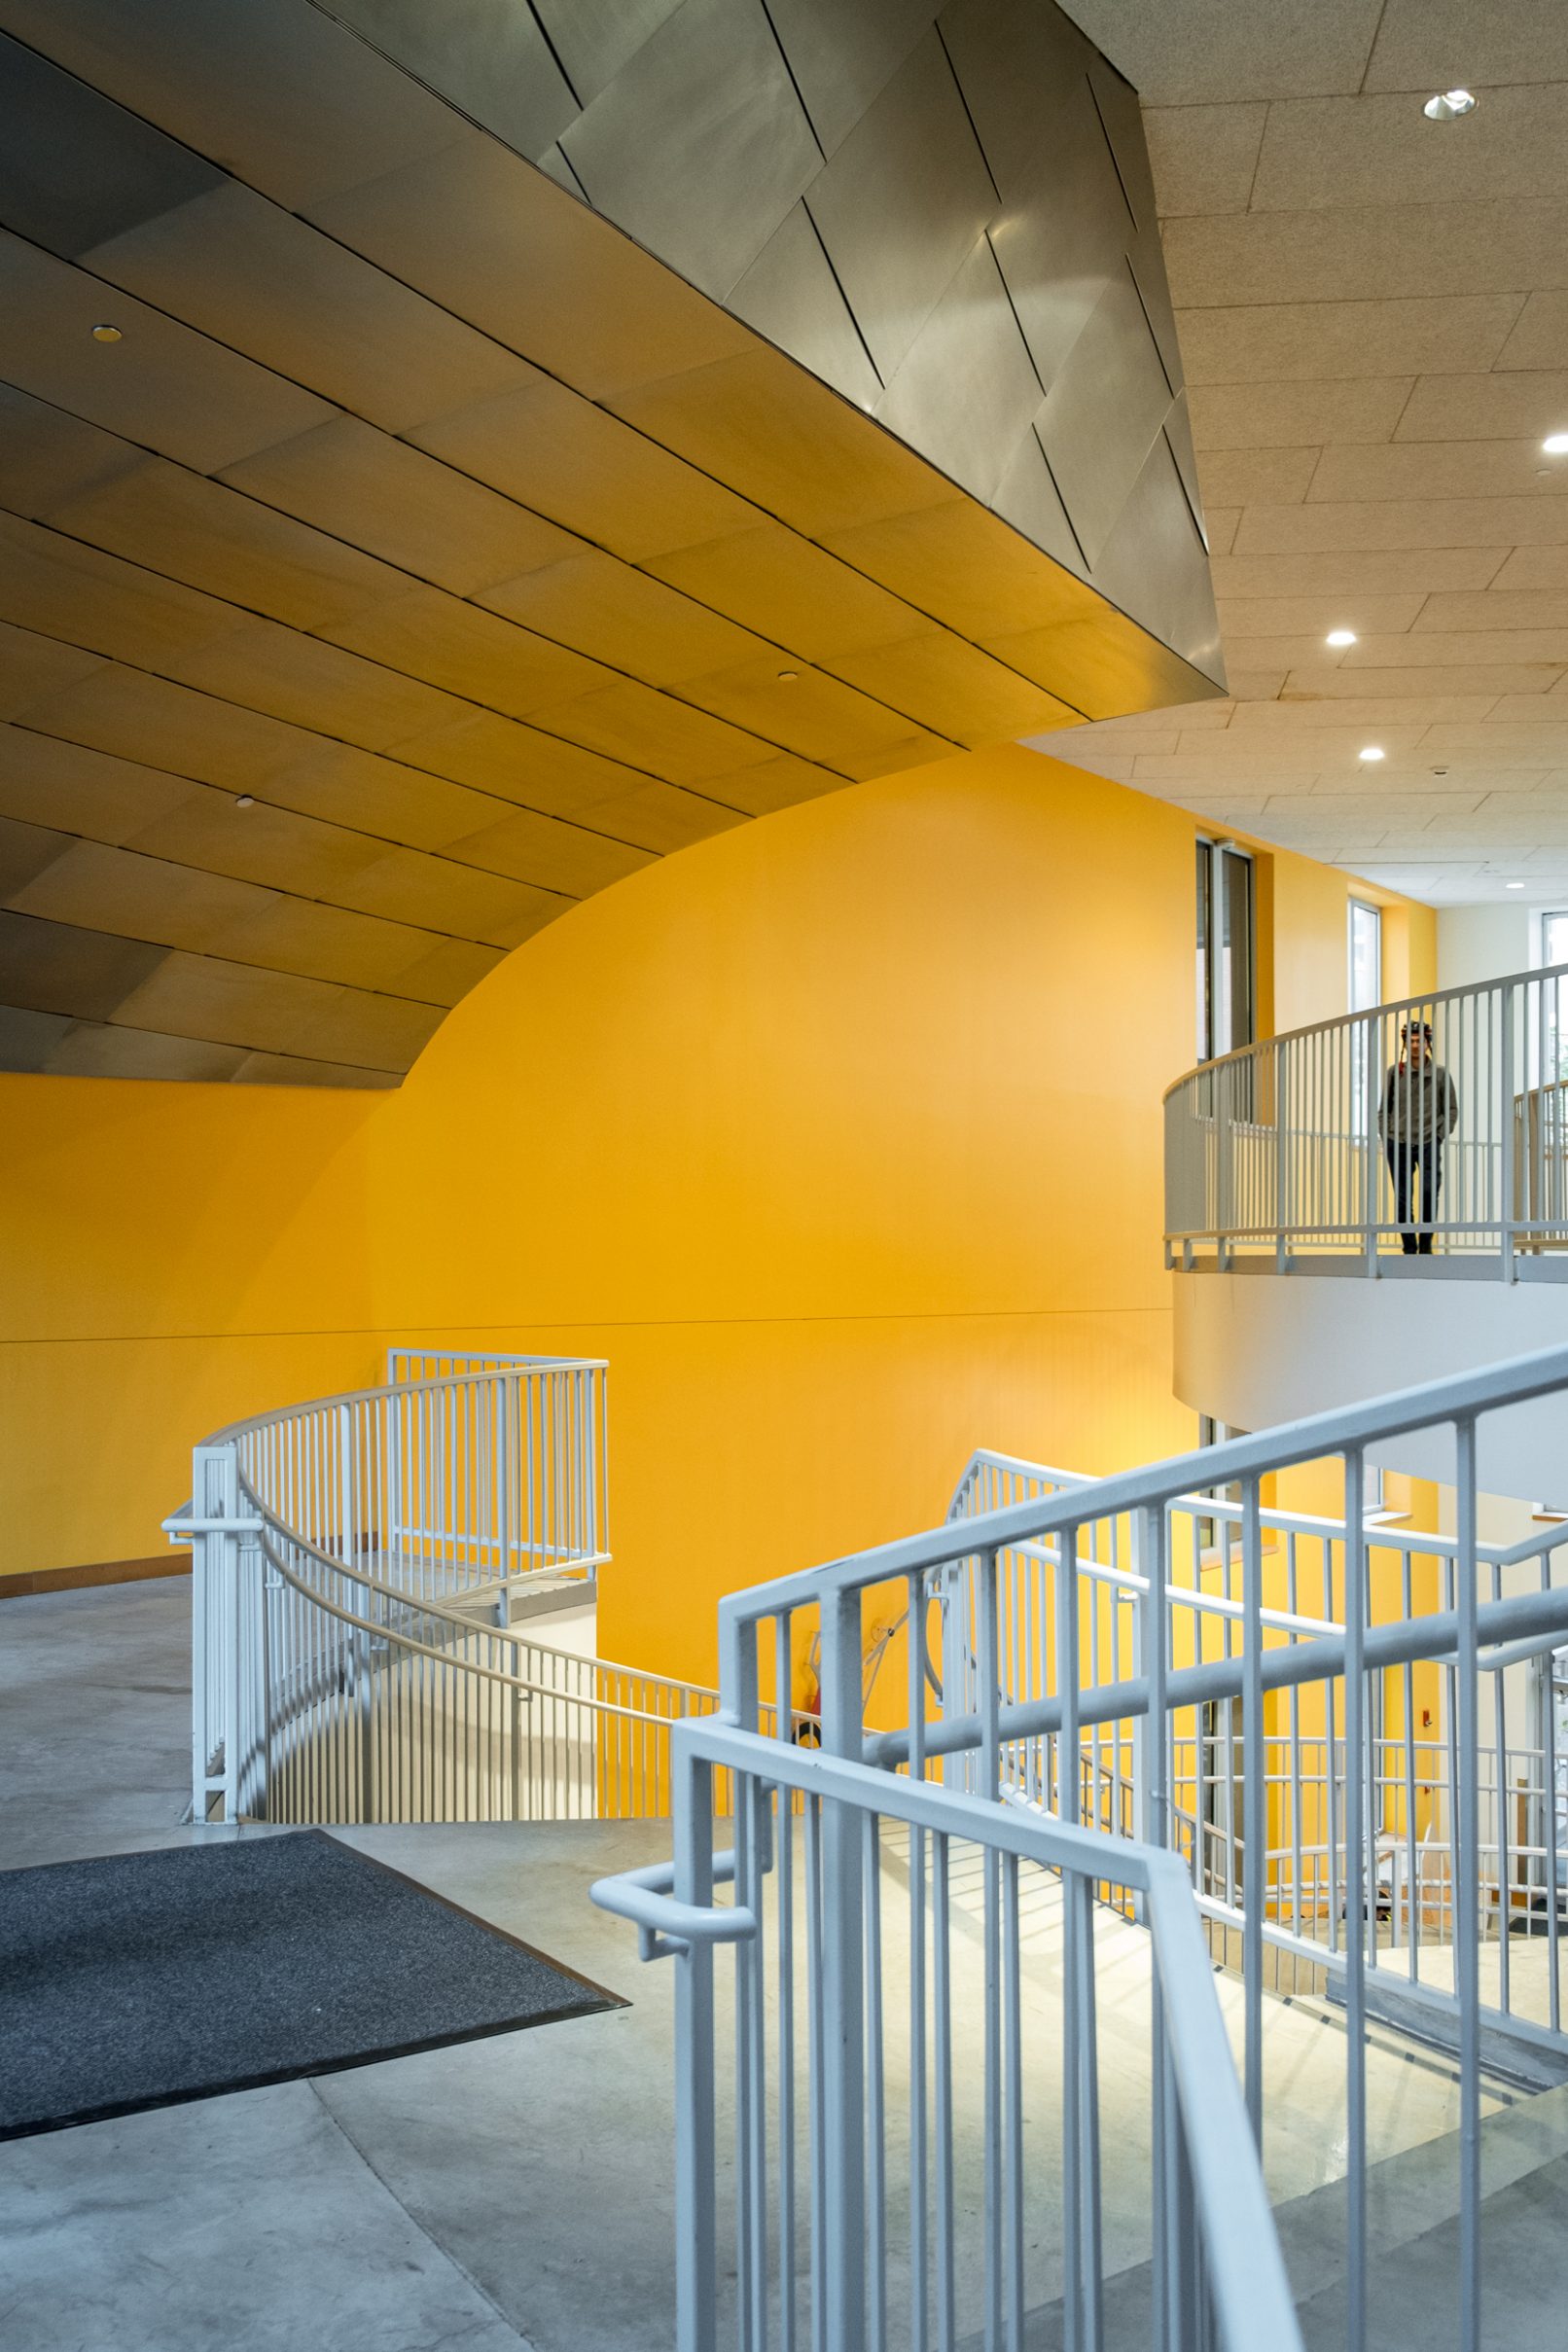 Architectural photography of the Ray and Maria Stata Center at the Massachusetts Institute of Technology (MIT) in Boston designed by Frank Gehry featuring the interior of the space with yellow walls and an aluminum ceiling